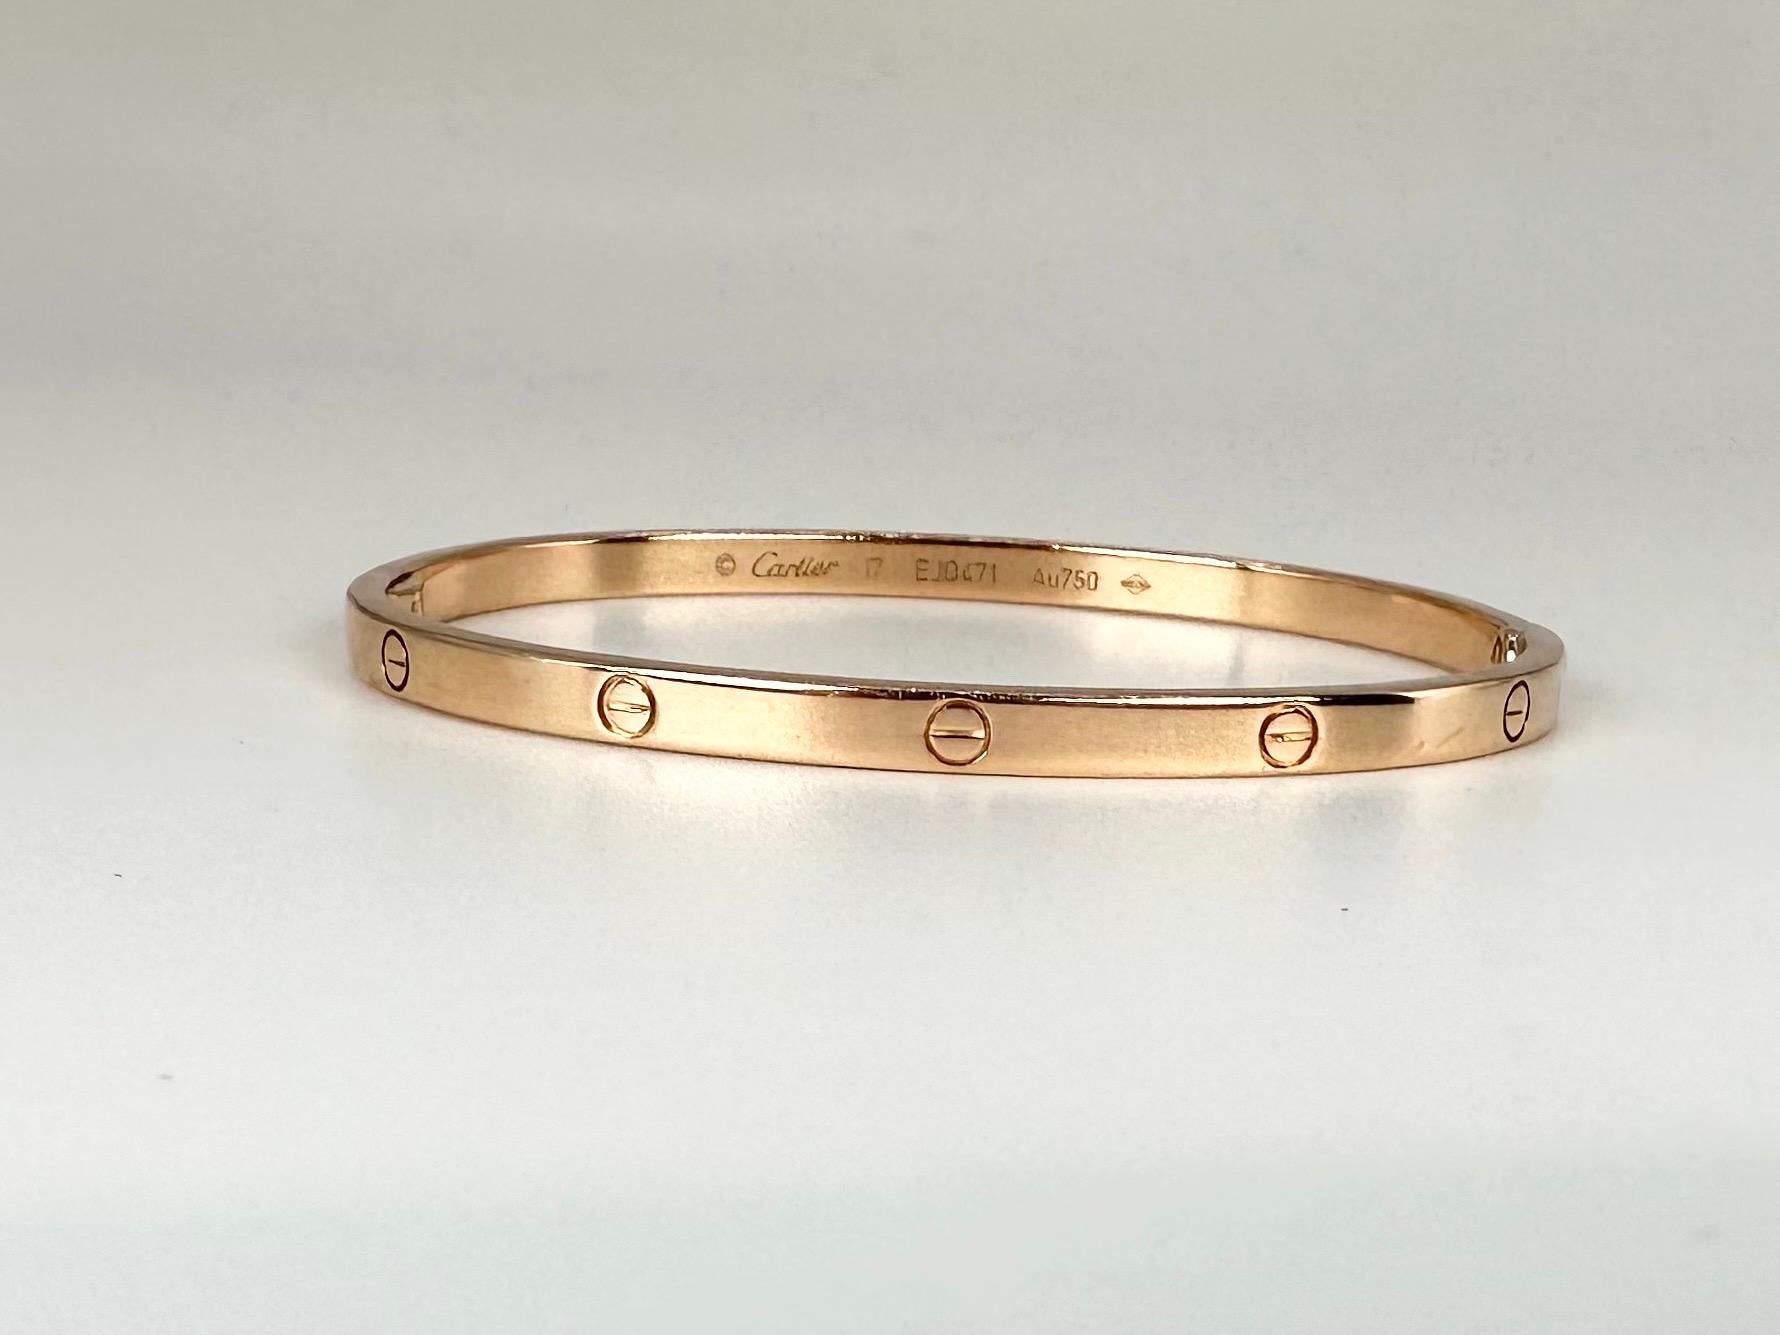 Cartier love bangle bracelet, 100% authentic!

GOLD: 18KT yellow gold
size: 17
Gram(s): 18.59
Item#: 440-00028 APTT

WHAT YOU GET AT STAMPAR JEWELERS:
Stampar Jewelers, located in the heart of Jupiter, Florida, is a custom jewelry store and studio